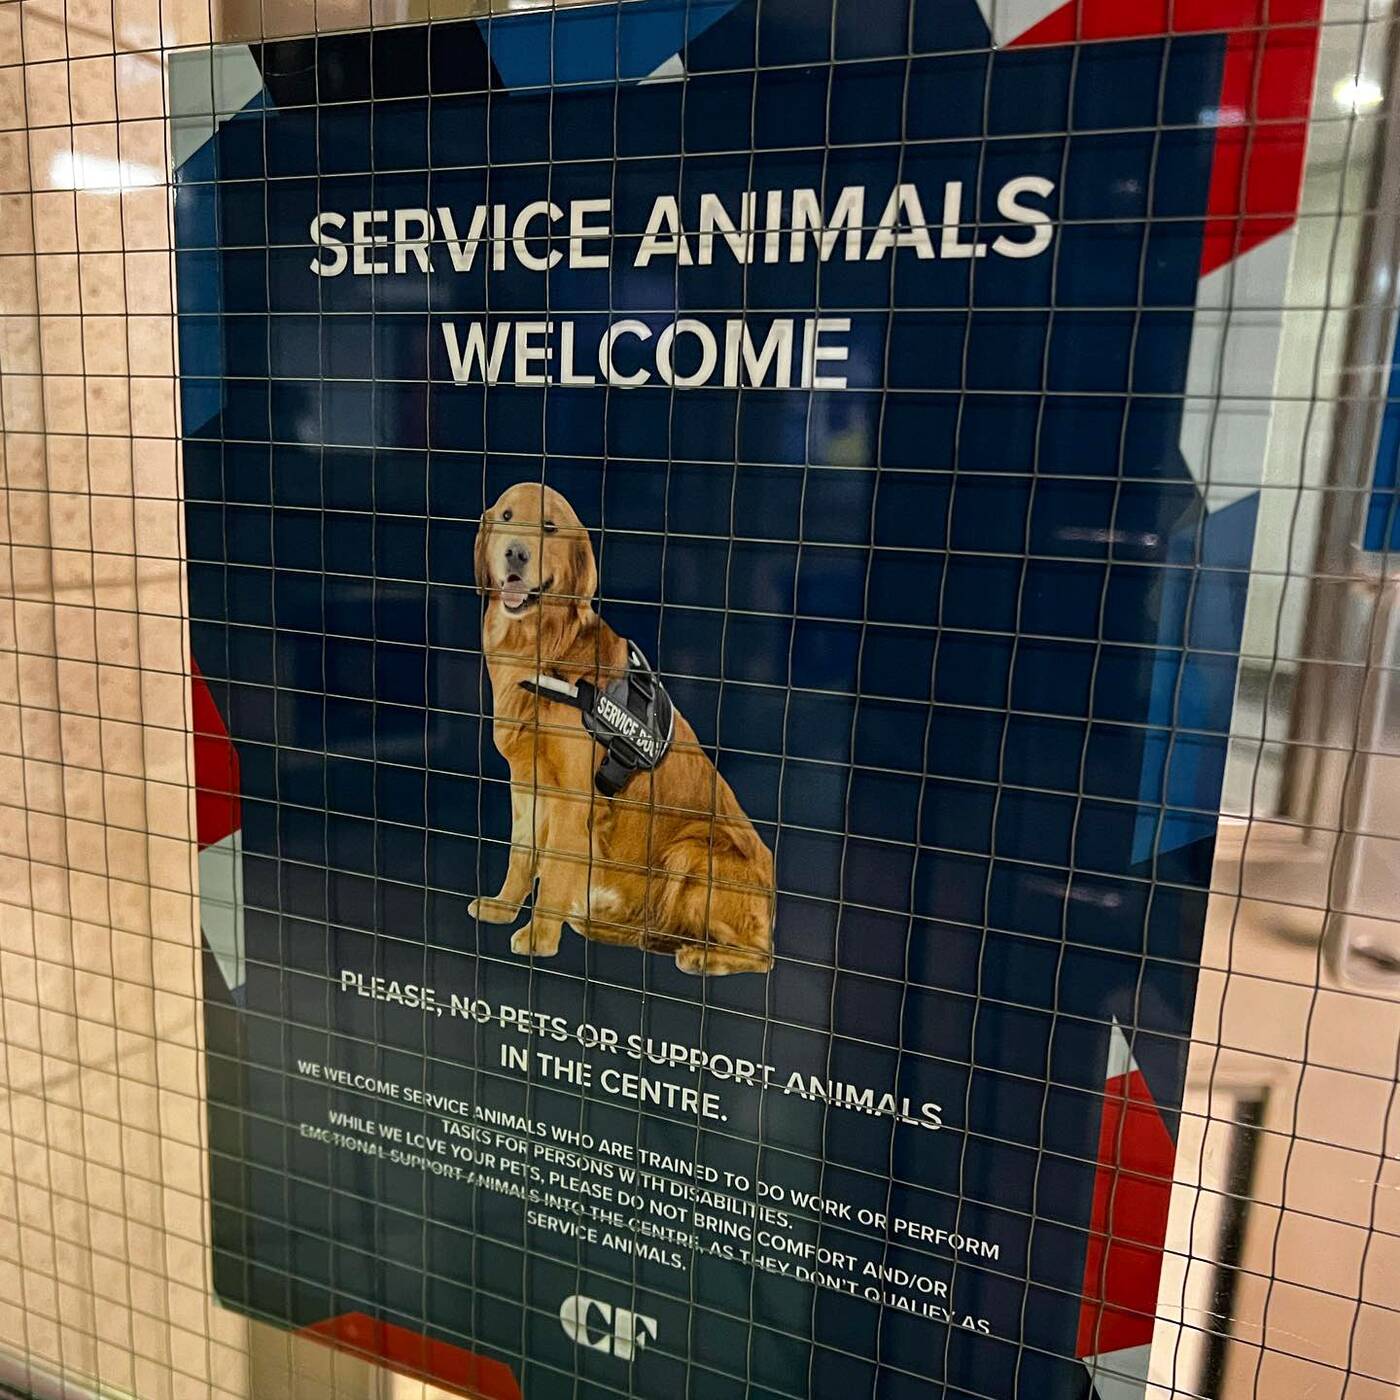 We now finally know if dogs are allowed inside the Toronto Eaton Centre